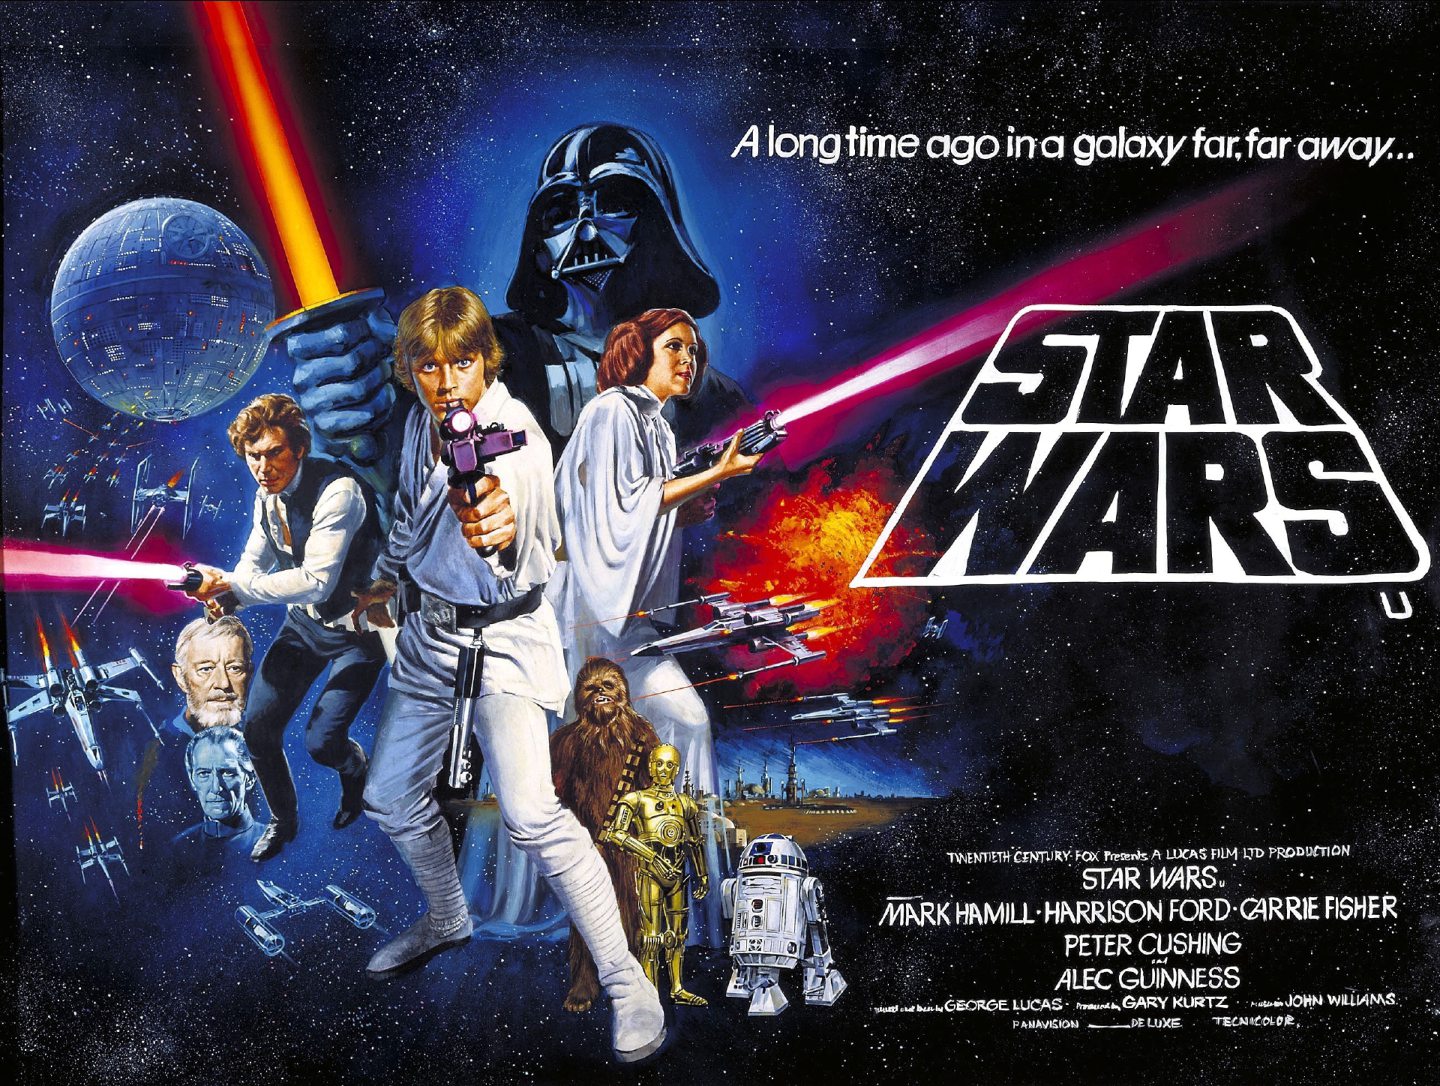 The poster for the first Star Wars movie, A New Hope